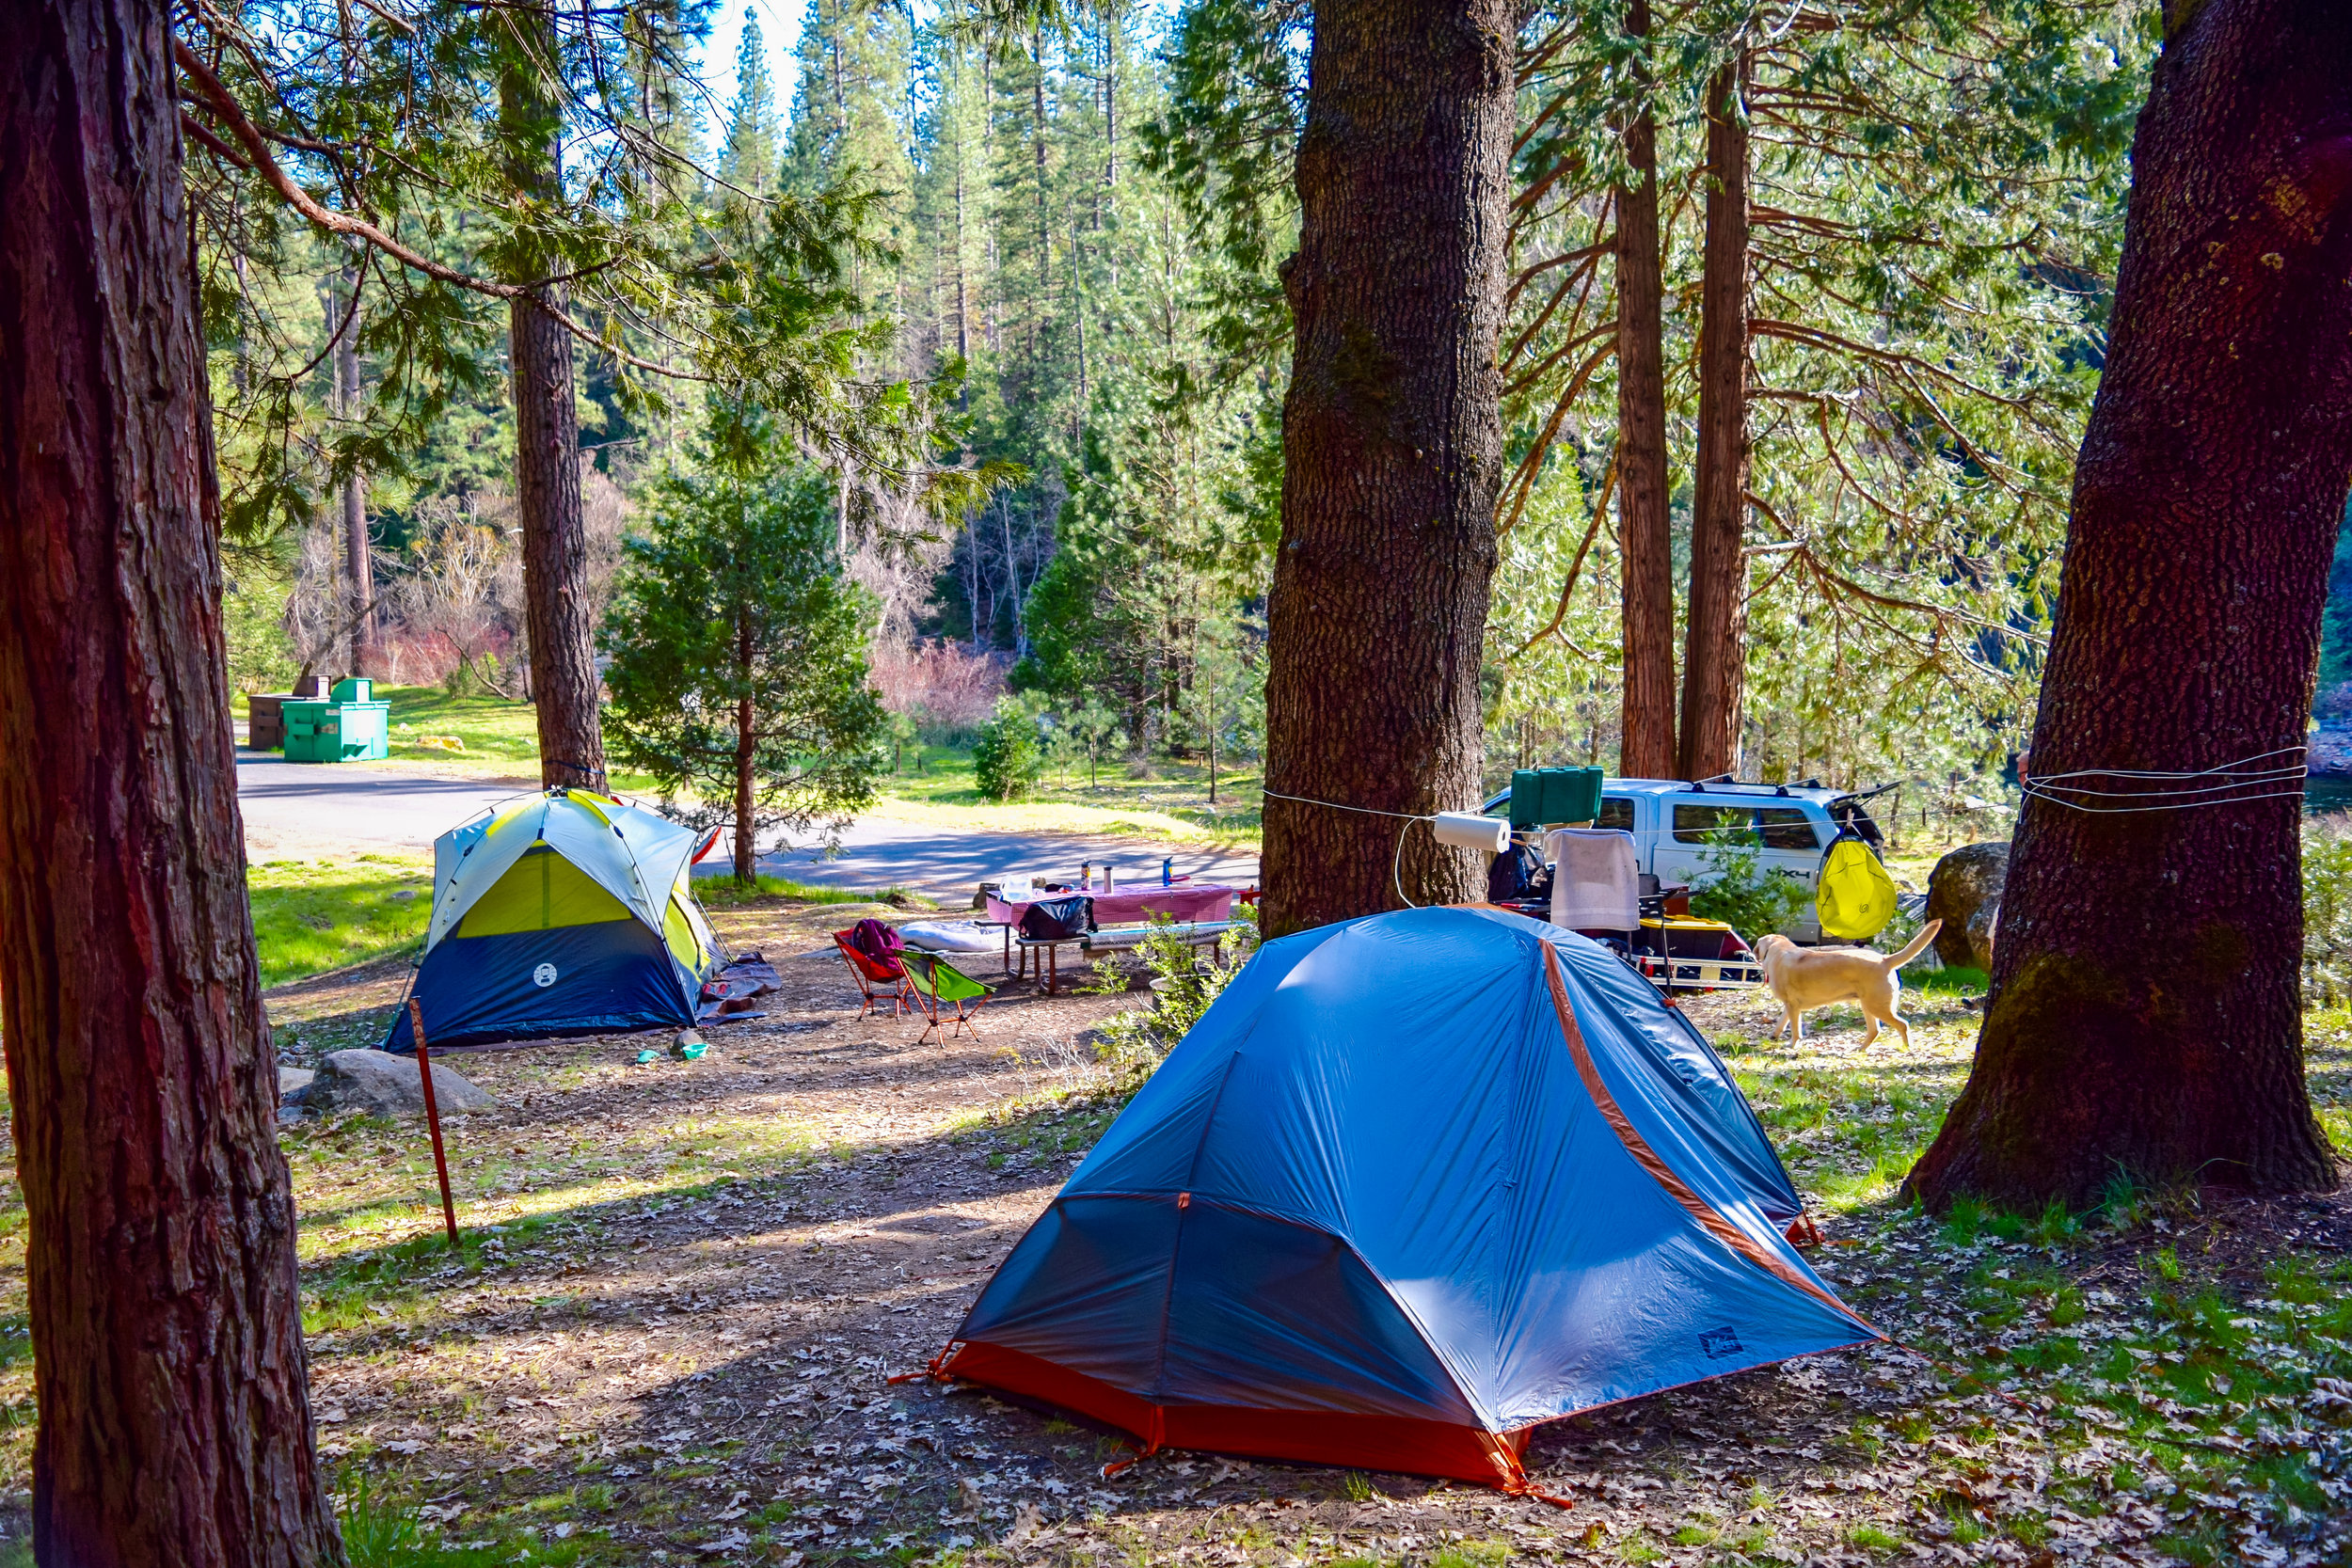 The united states is home to 58 national parks, each with its own unique beauty and landscape. How To Car Camp In Yosemite National Park Backcountry Emily